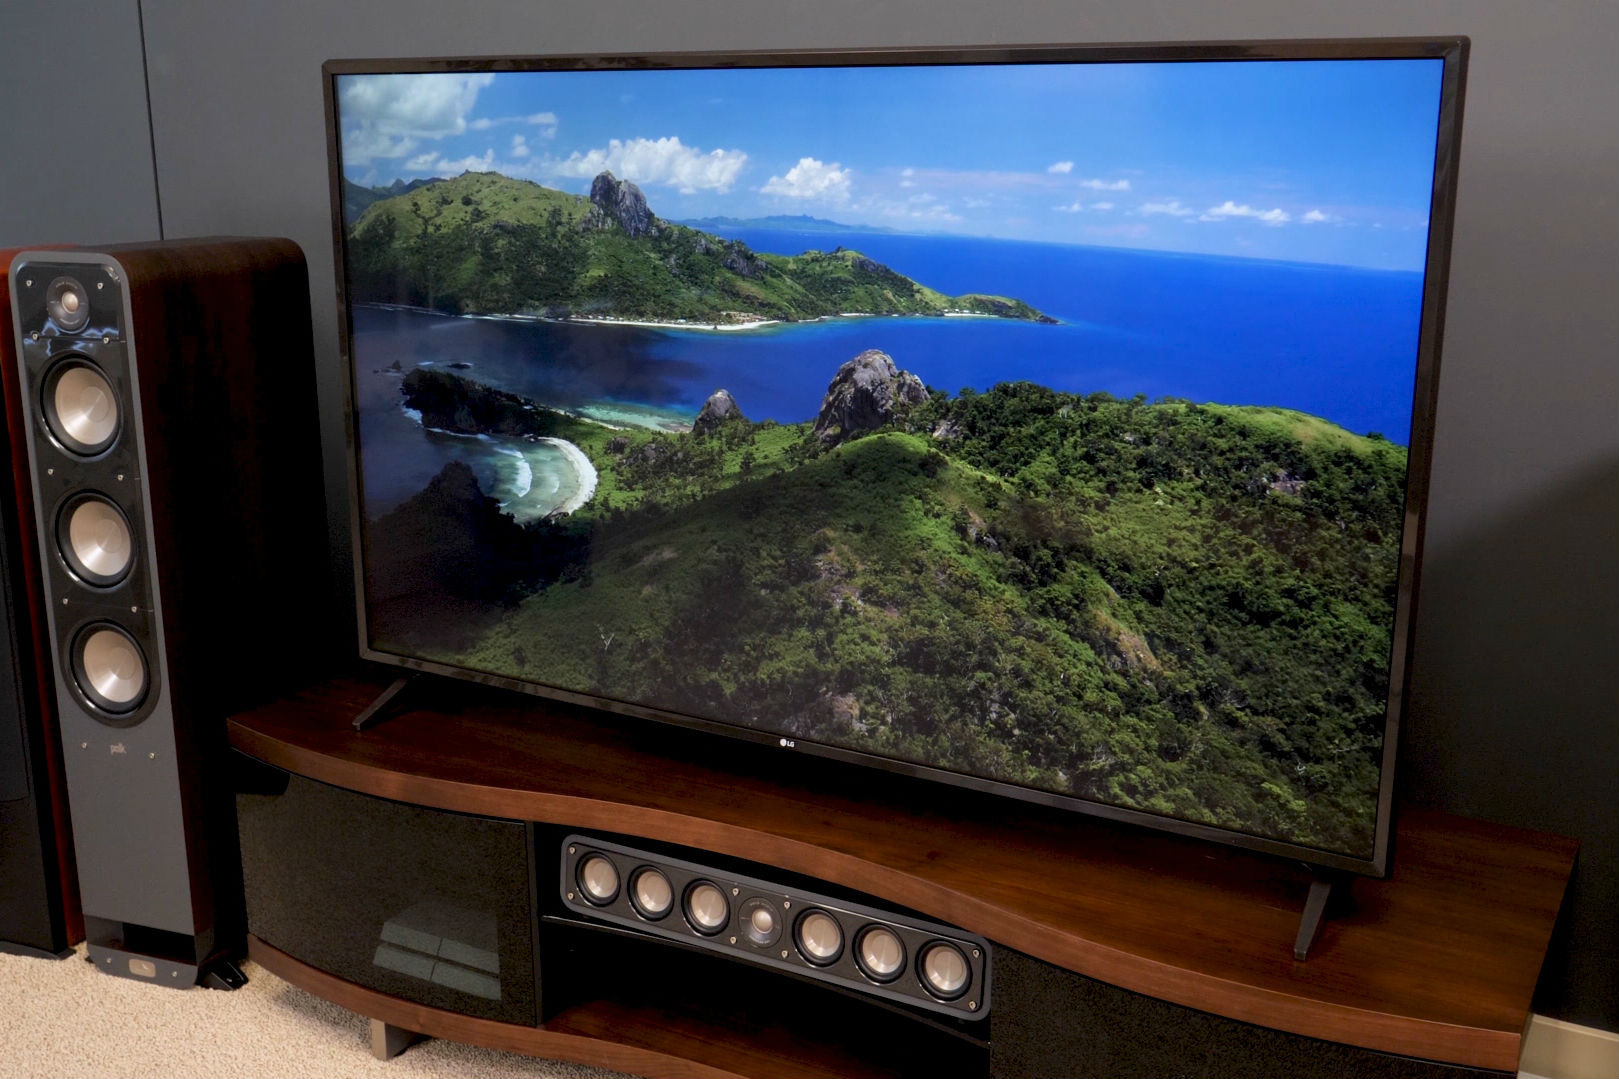 LG | TVs, Smart Home, and More 24 | Digital Trends